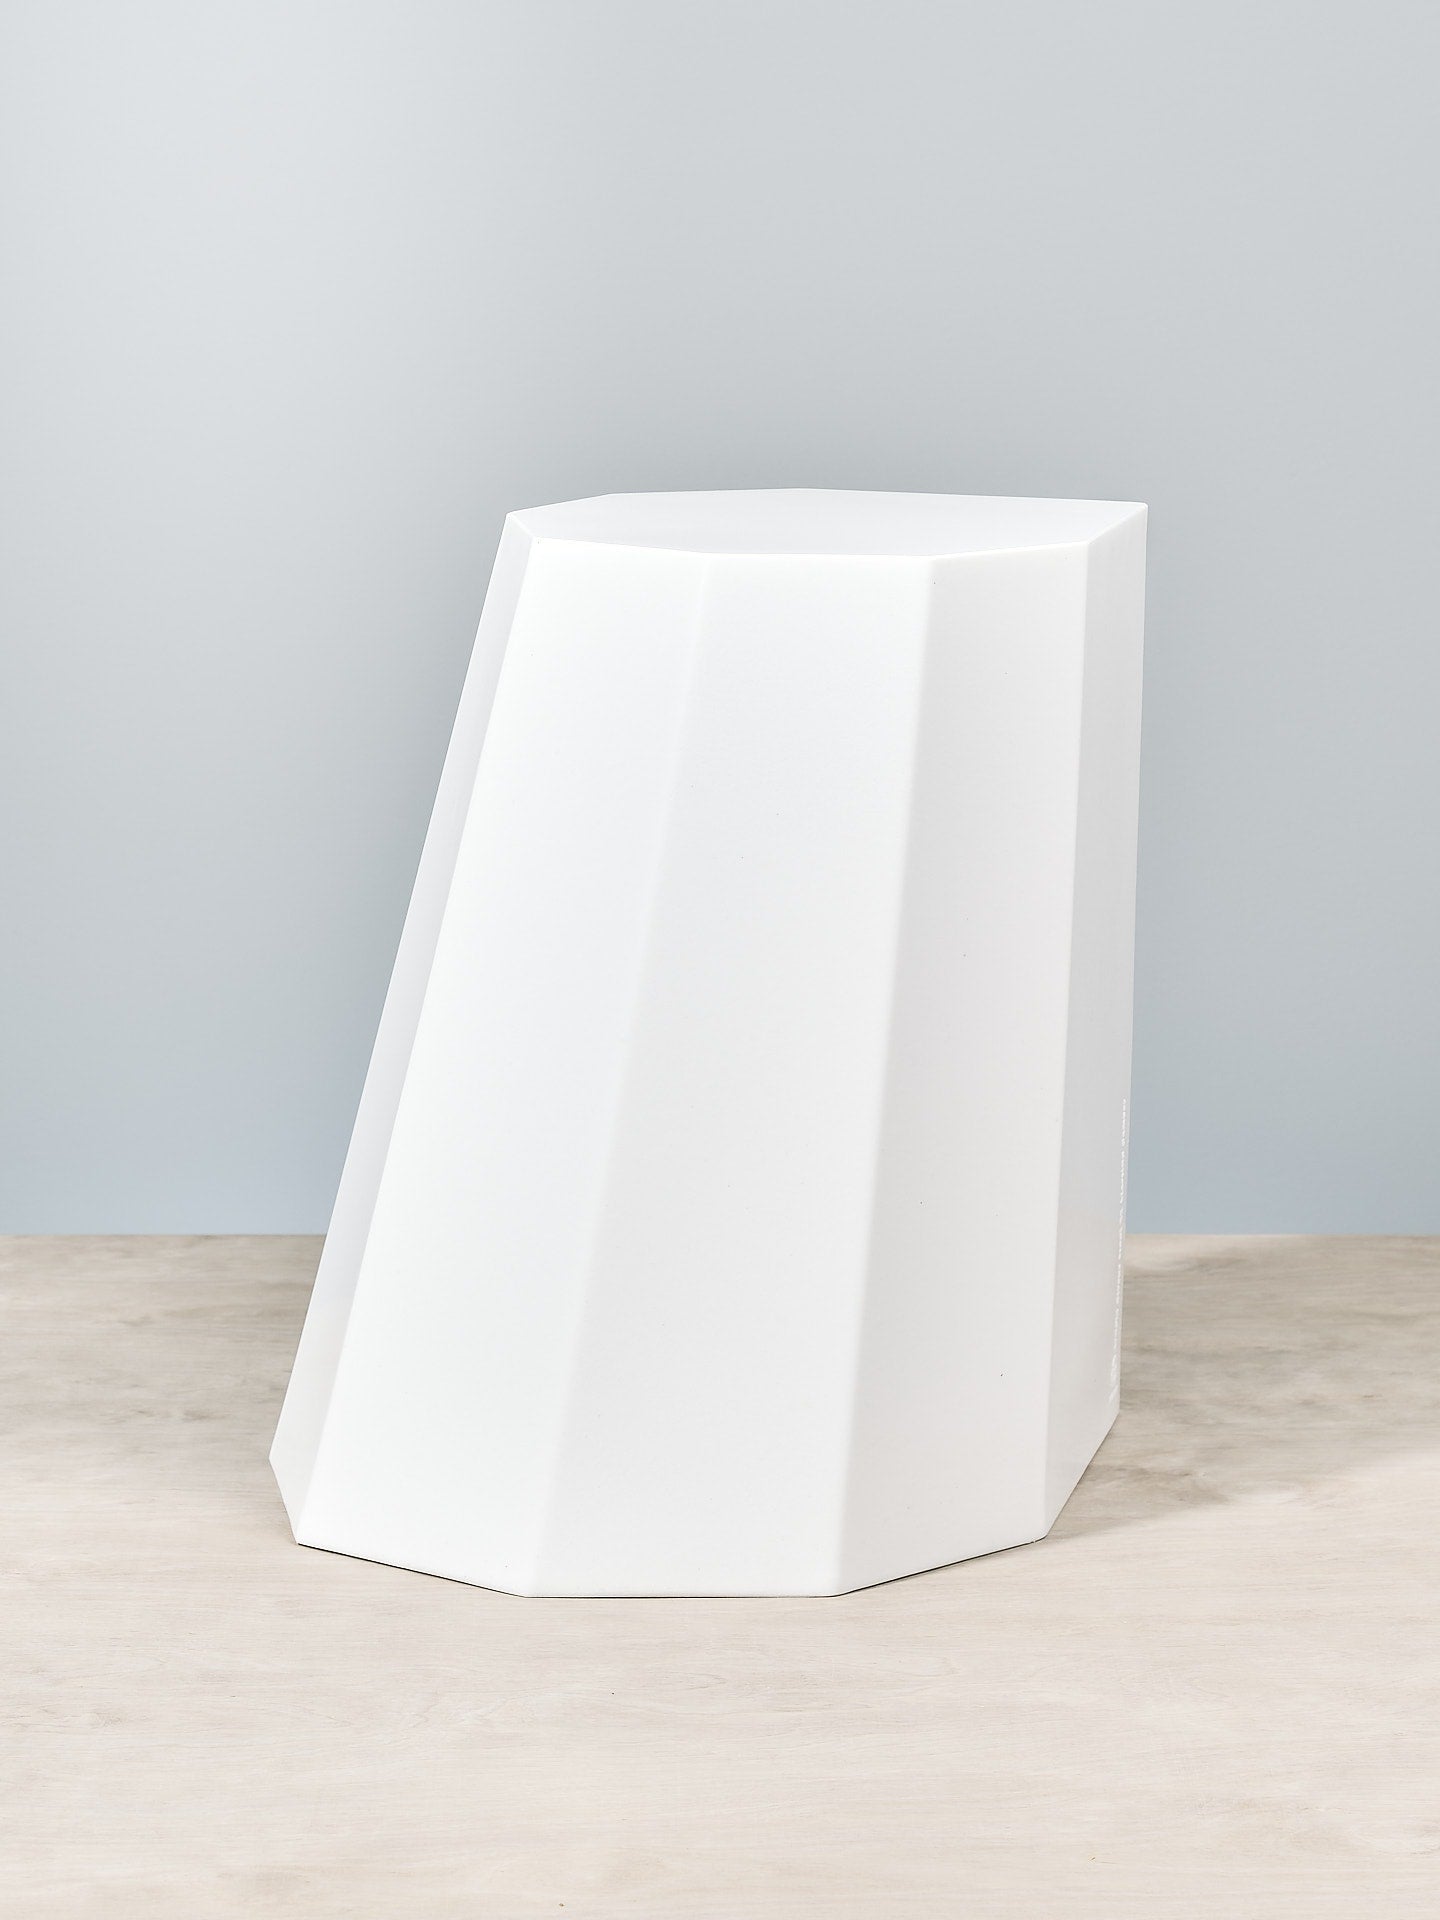 An Arnold Circus Stool - Chalk by Martino Gamper sitting on top of a wooden table.